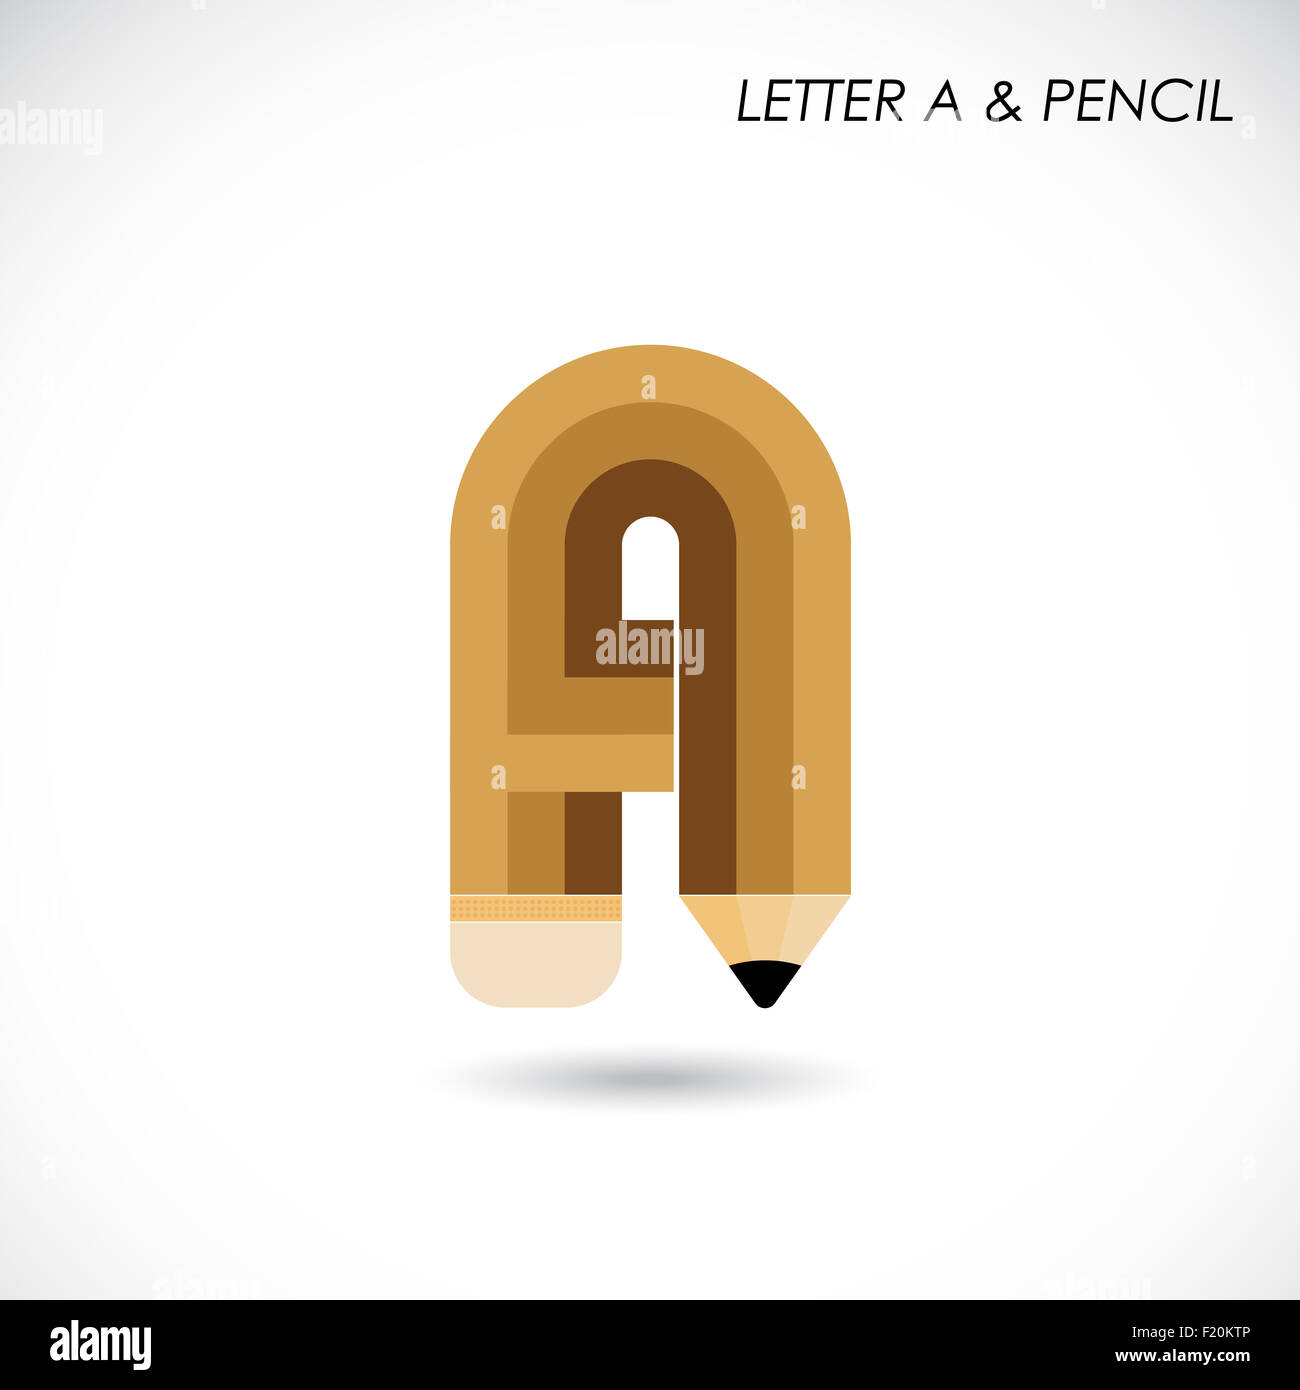 Creative letter A icon abstract logo design  template with pencil symbol. Corporate business creative logotype symbol. Stock Photo